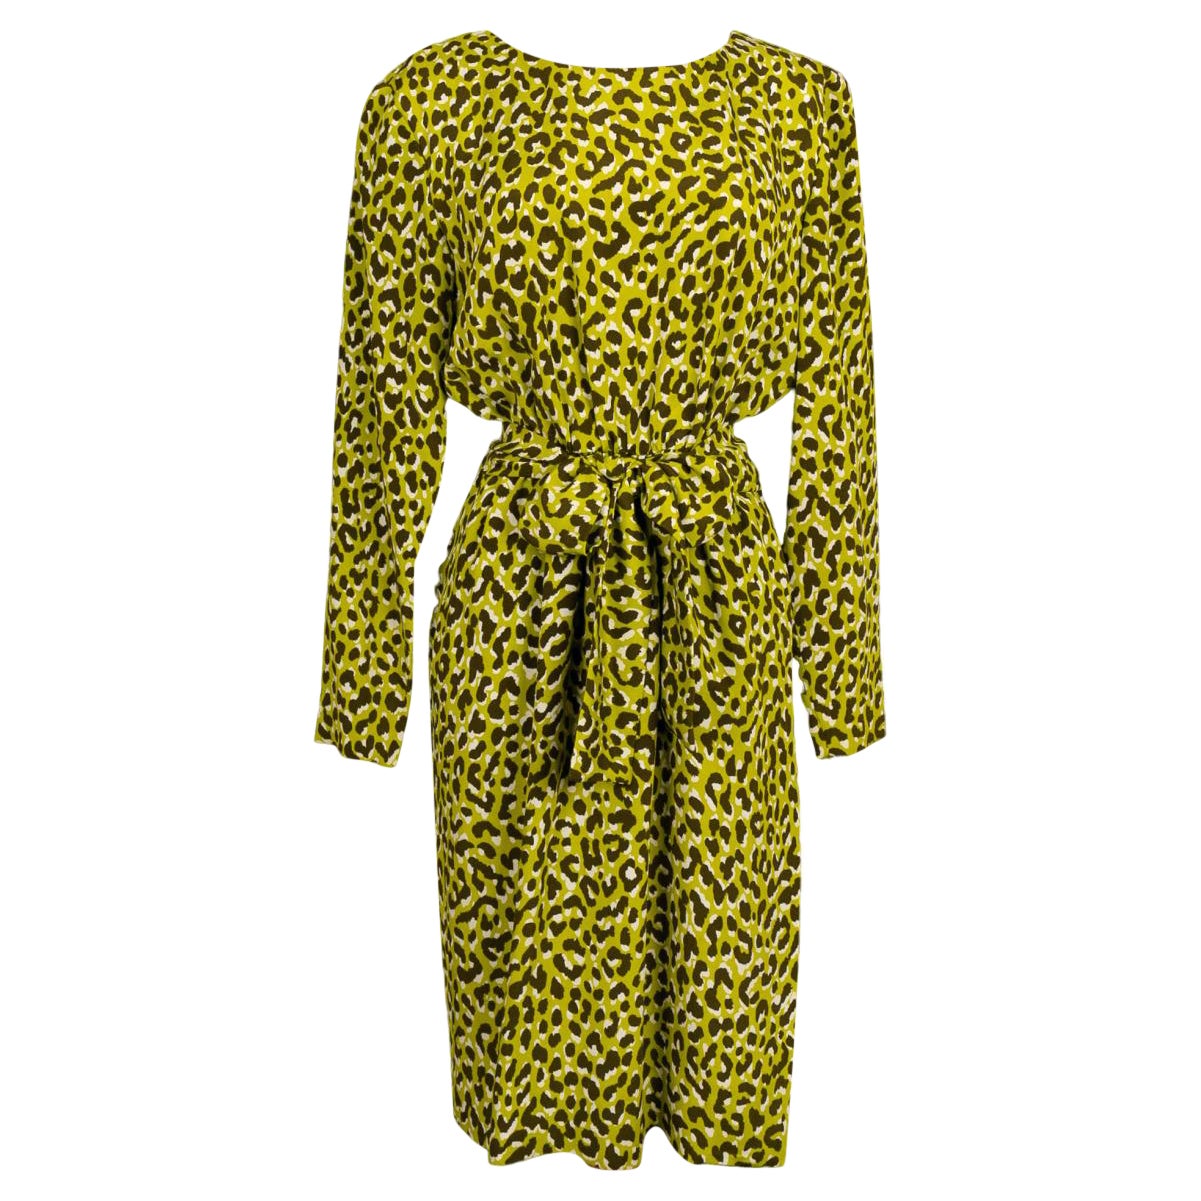 Yves Saint Laurent Panther Dress For Sale